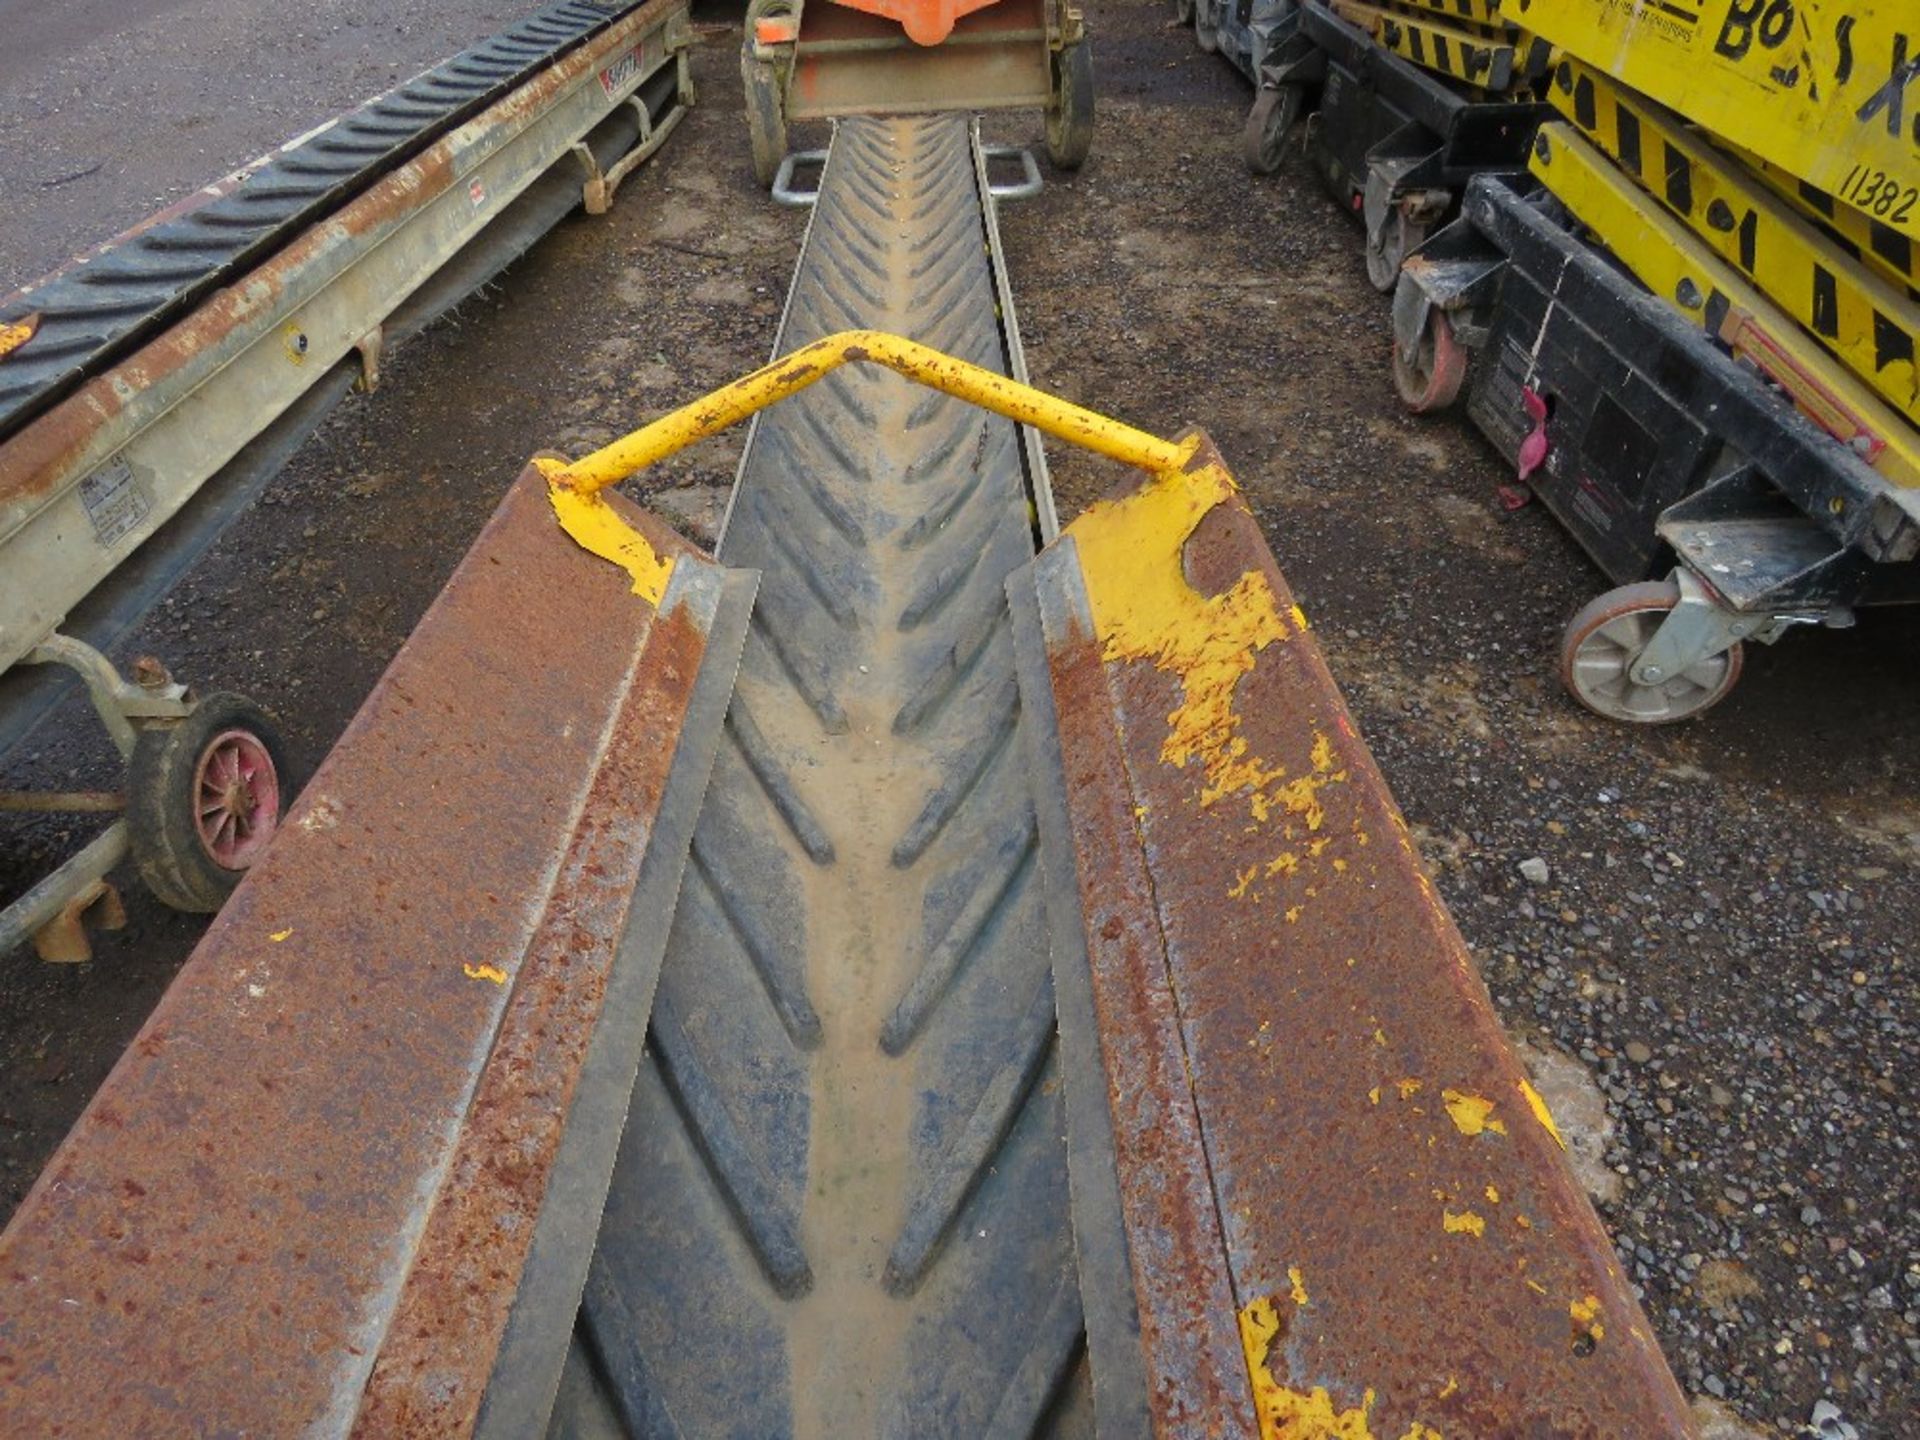 SHIFTA 110 VOLT MUCK CONVEYOR WITH HOPPER, 3.2M LENGTH APPROX. THIS LOT IS SOLD UNDER THE AUCTION - Image 3 of 4